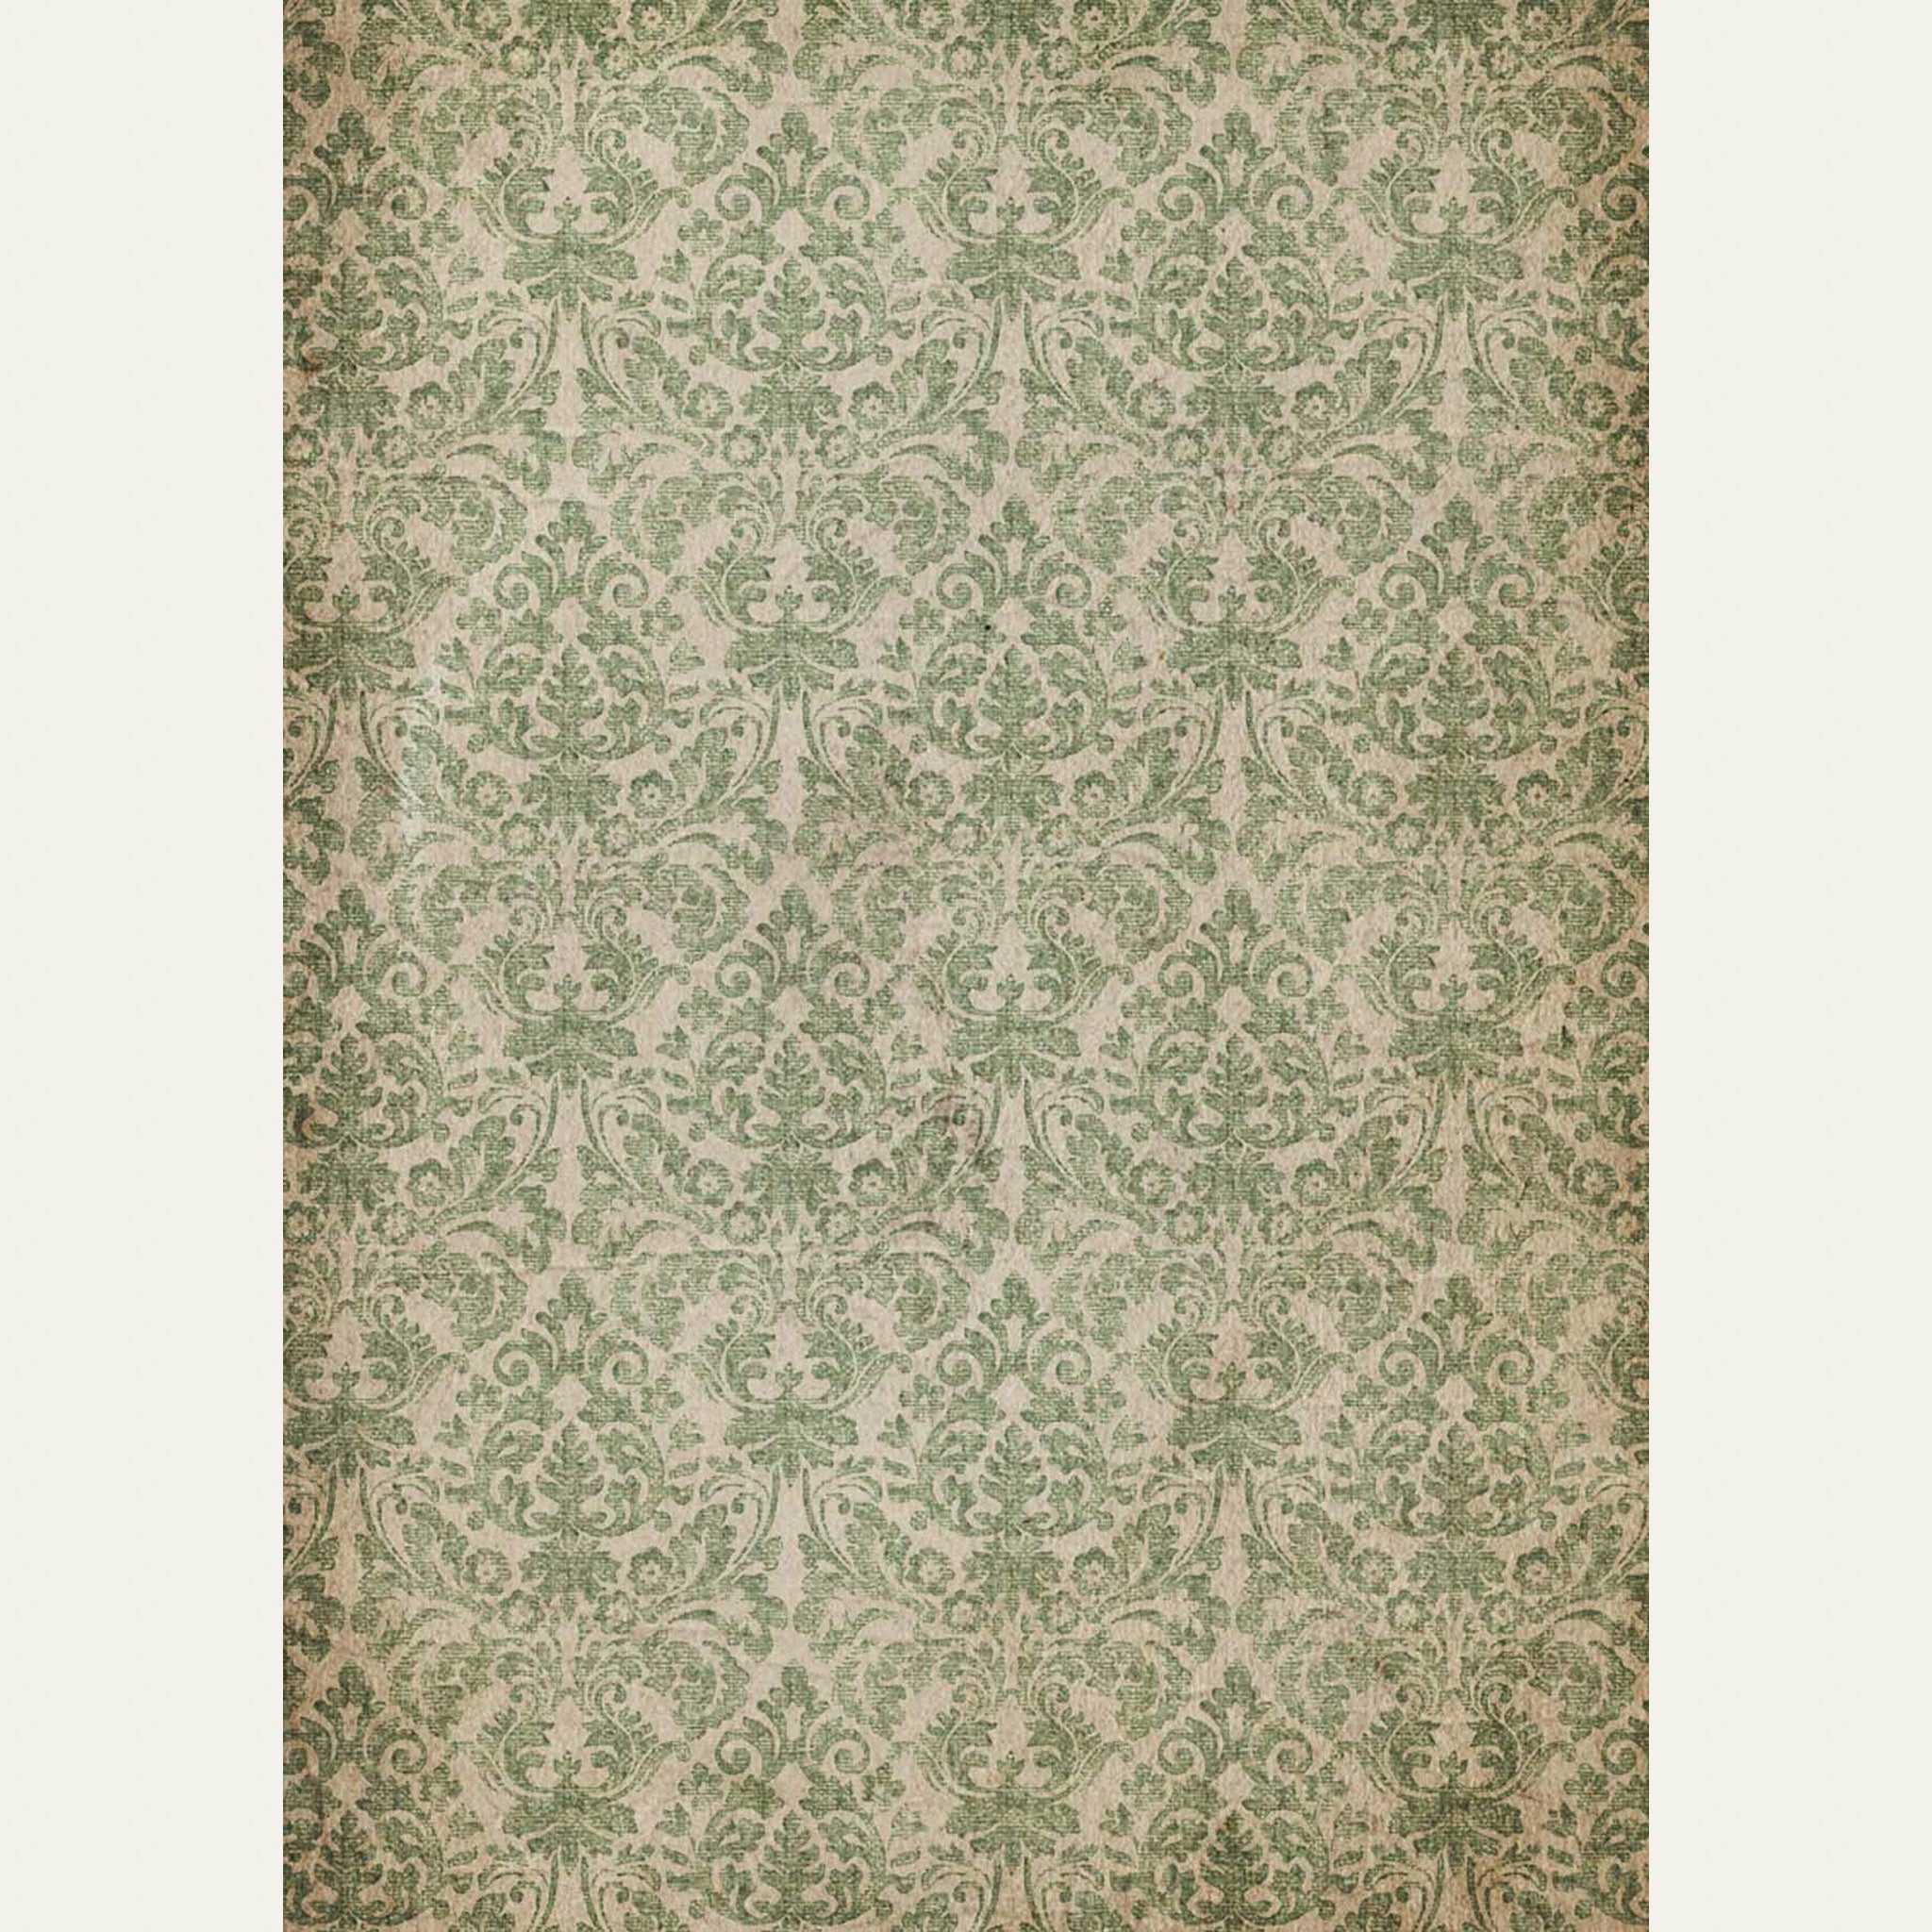 Vintage style Wallpaper Damask A1 Decoupage Rice Paper. White borders on the sides.